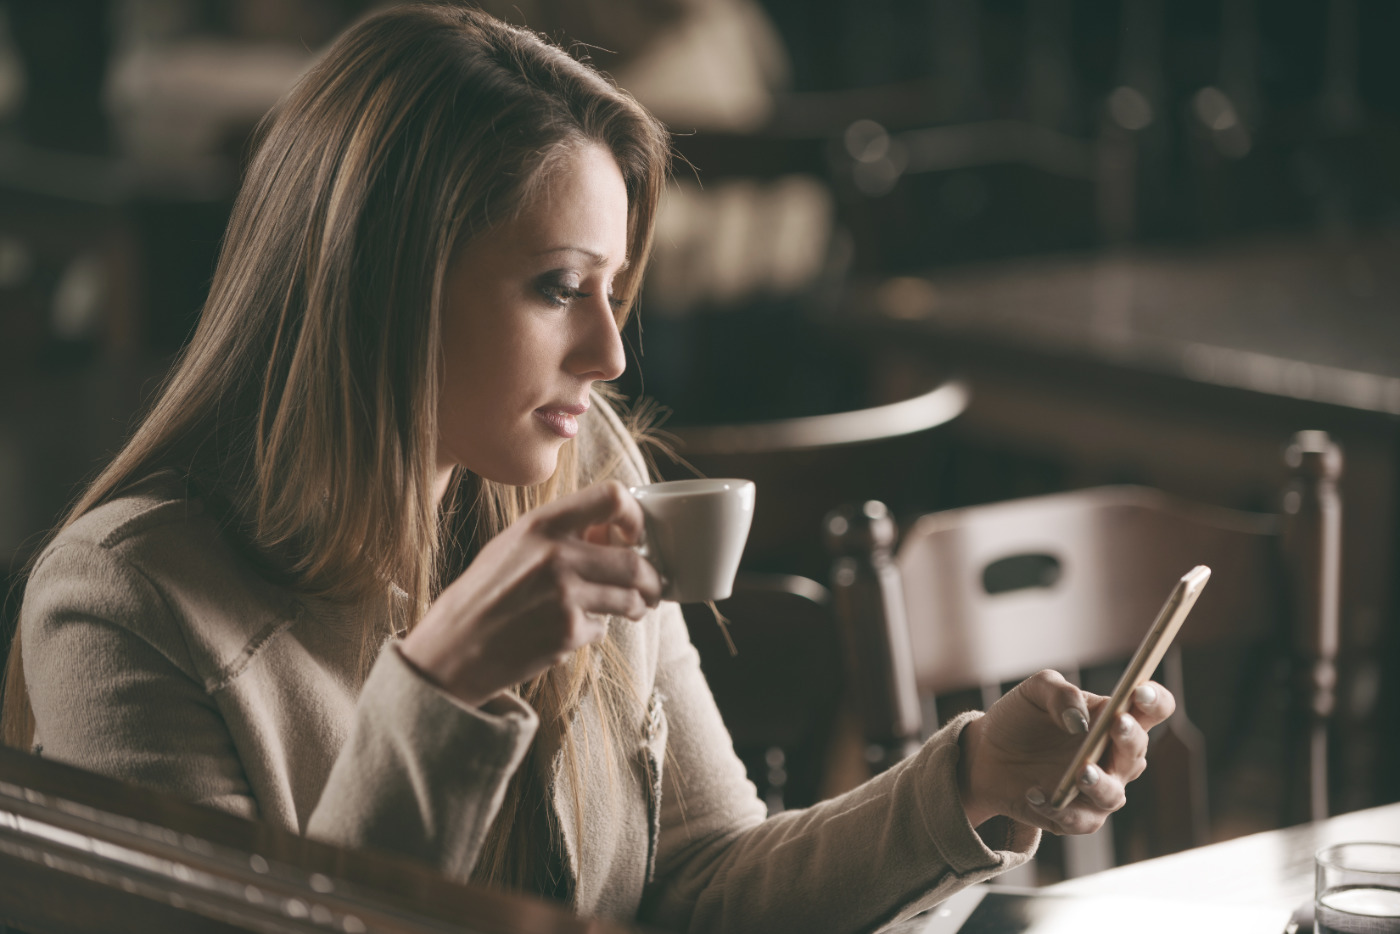 Woman drinking coffee while browsing on mobile device